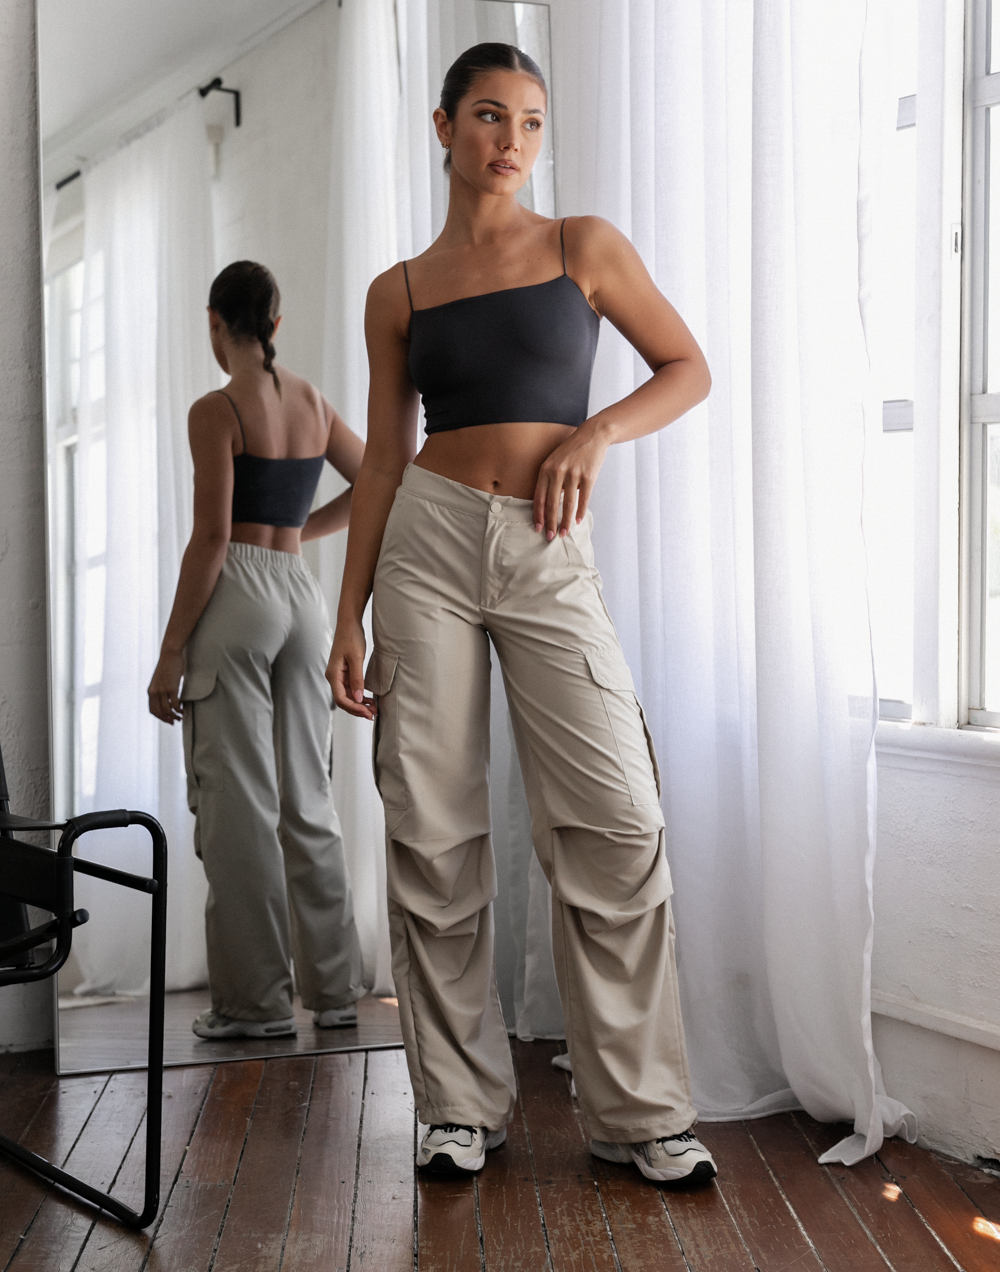 Tammy Crop Top (Charcoal) - Basic Crop Top - Women's Top - Charcoal Clothing